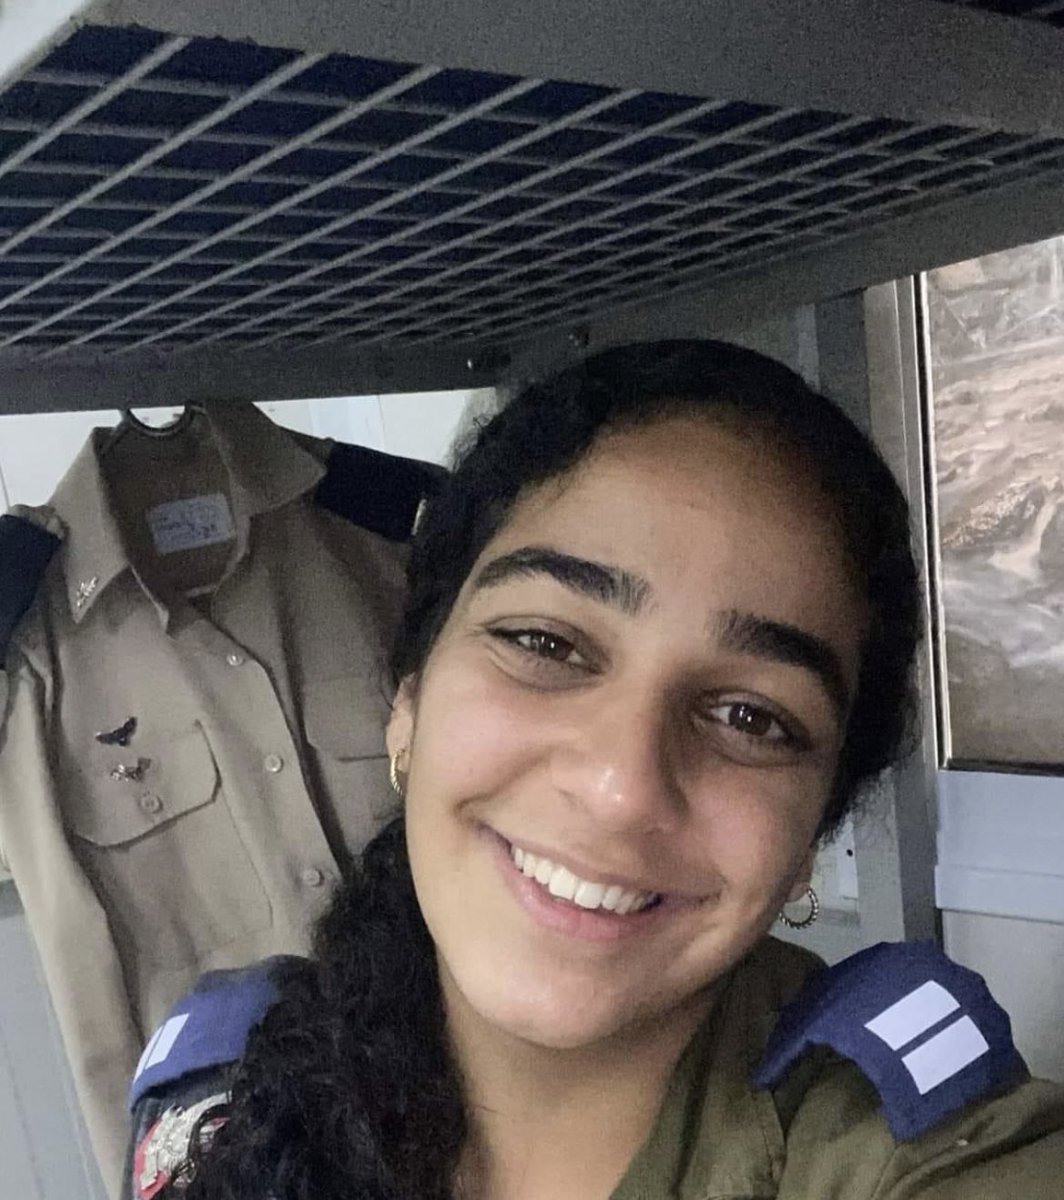 This is Captain Sahar, a commander in an Iron Dome battery. On 10/7 she was volunteering for weekend duty to relieve a friend. When all bell broke loose that day, she intercepted about 190 rockets from Hamas aimed at residents of southern Israel. When they ran out of…